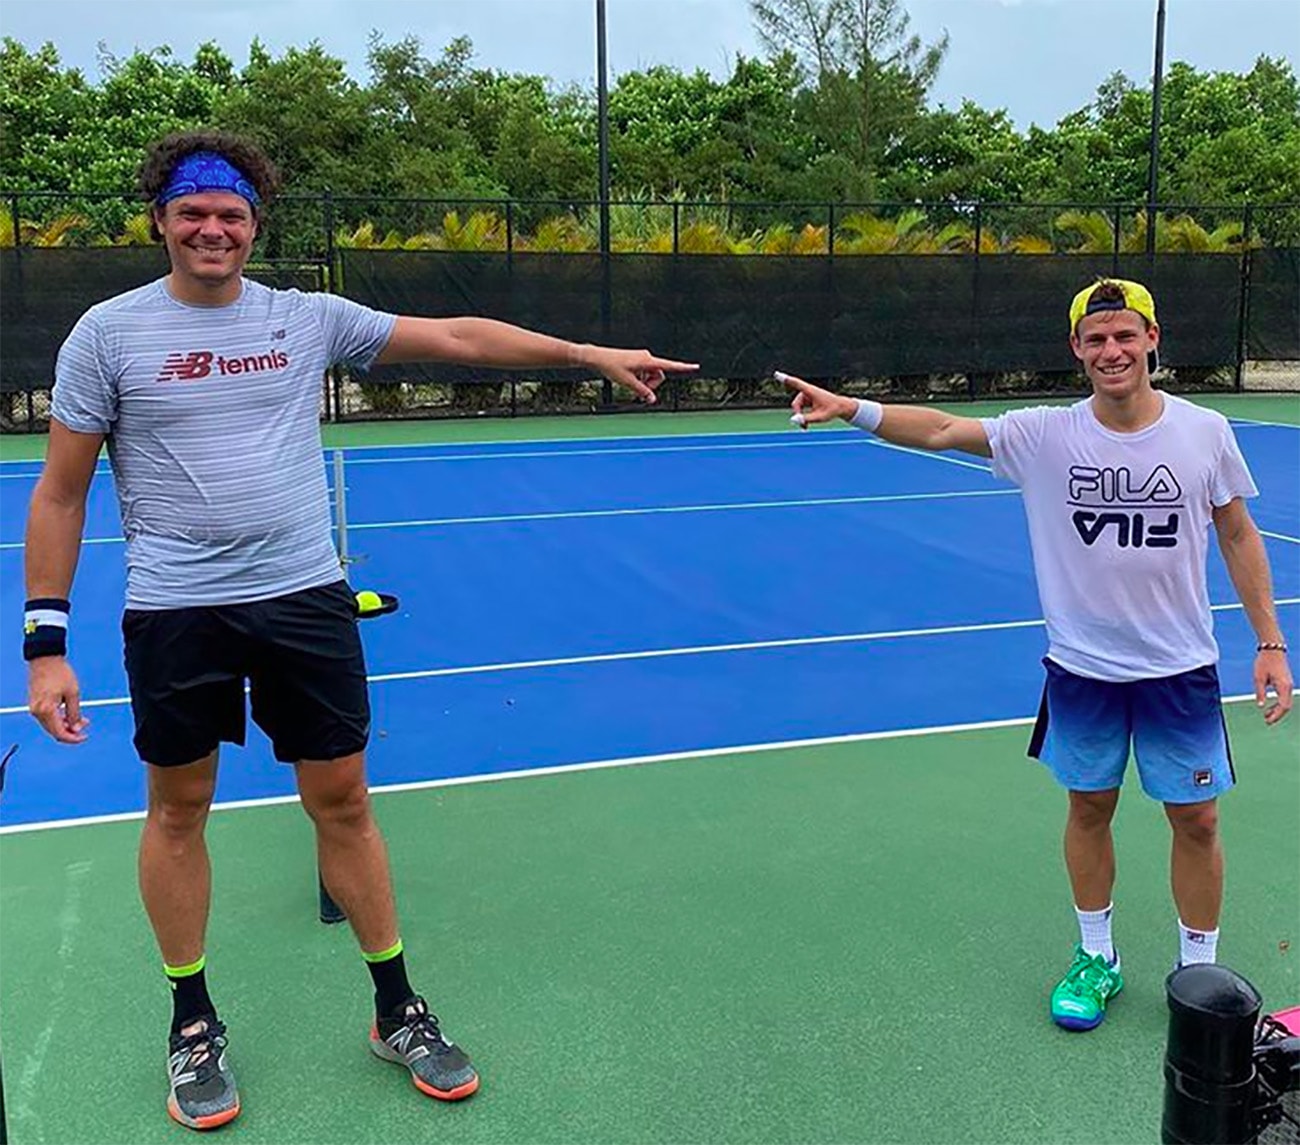 Canadians (and Schwartzman) train in The Bahamas